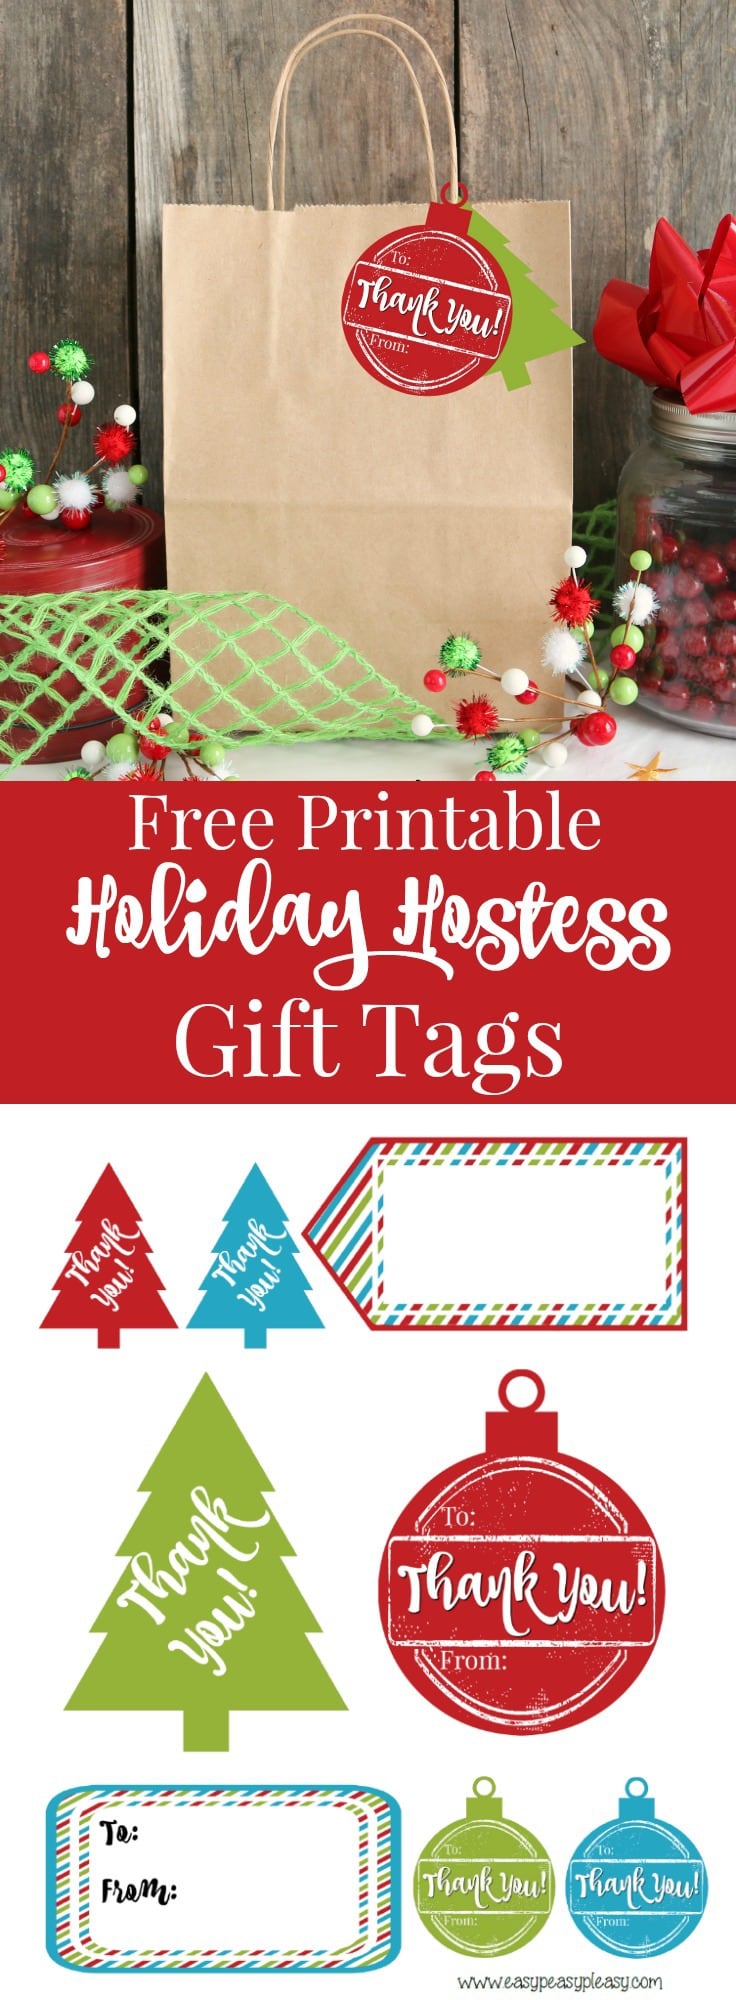 Free Printable Holiday Hostess Gift Tags found at easypeasypleasy.com